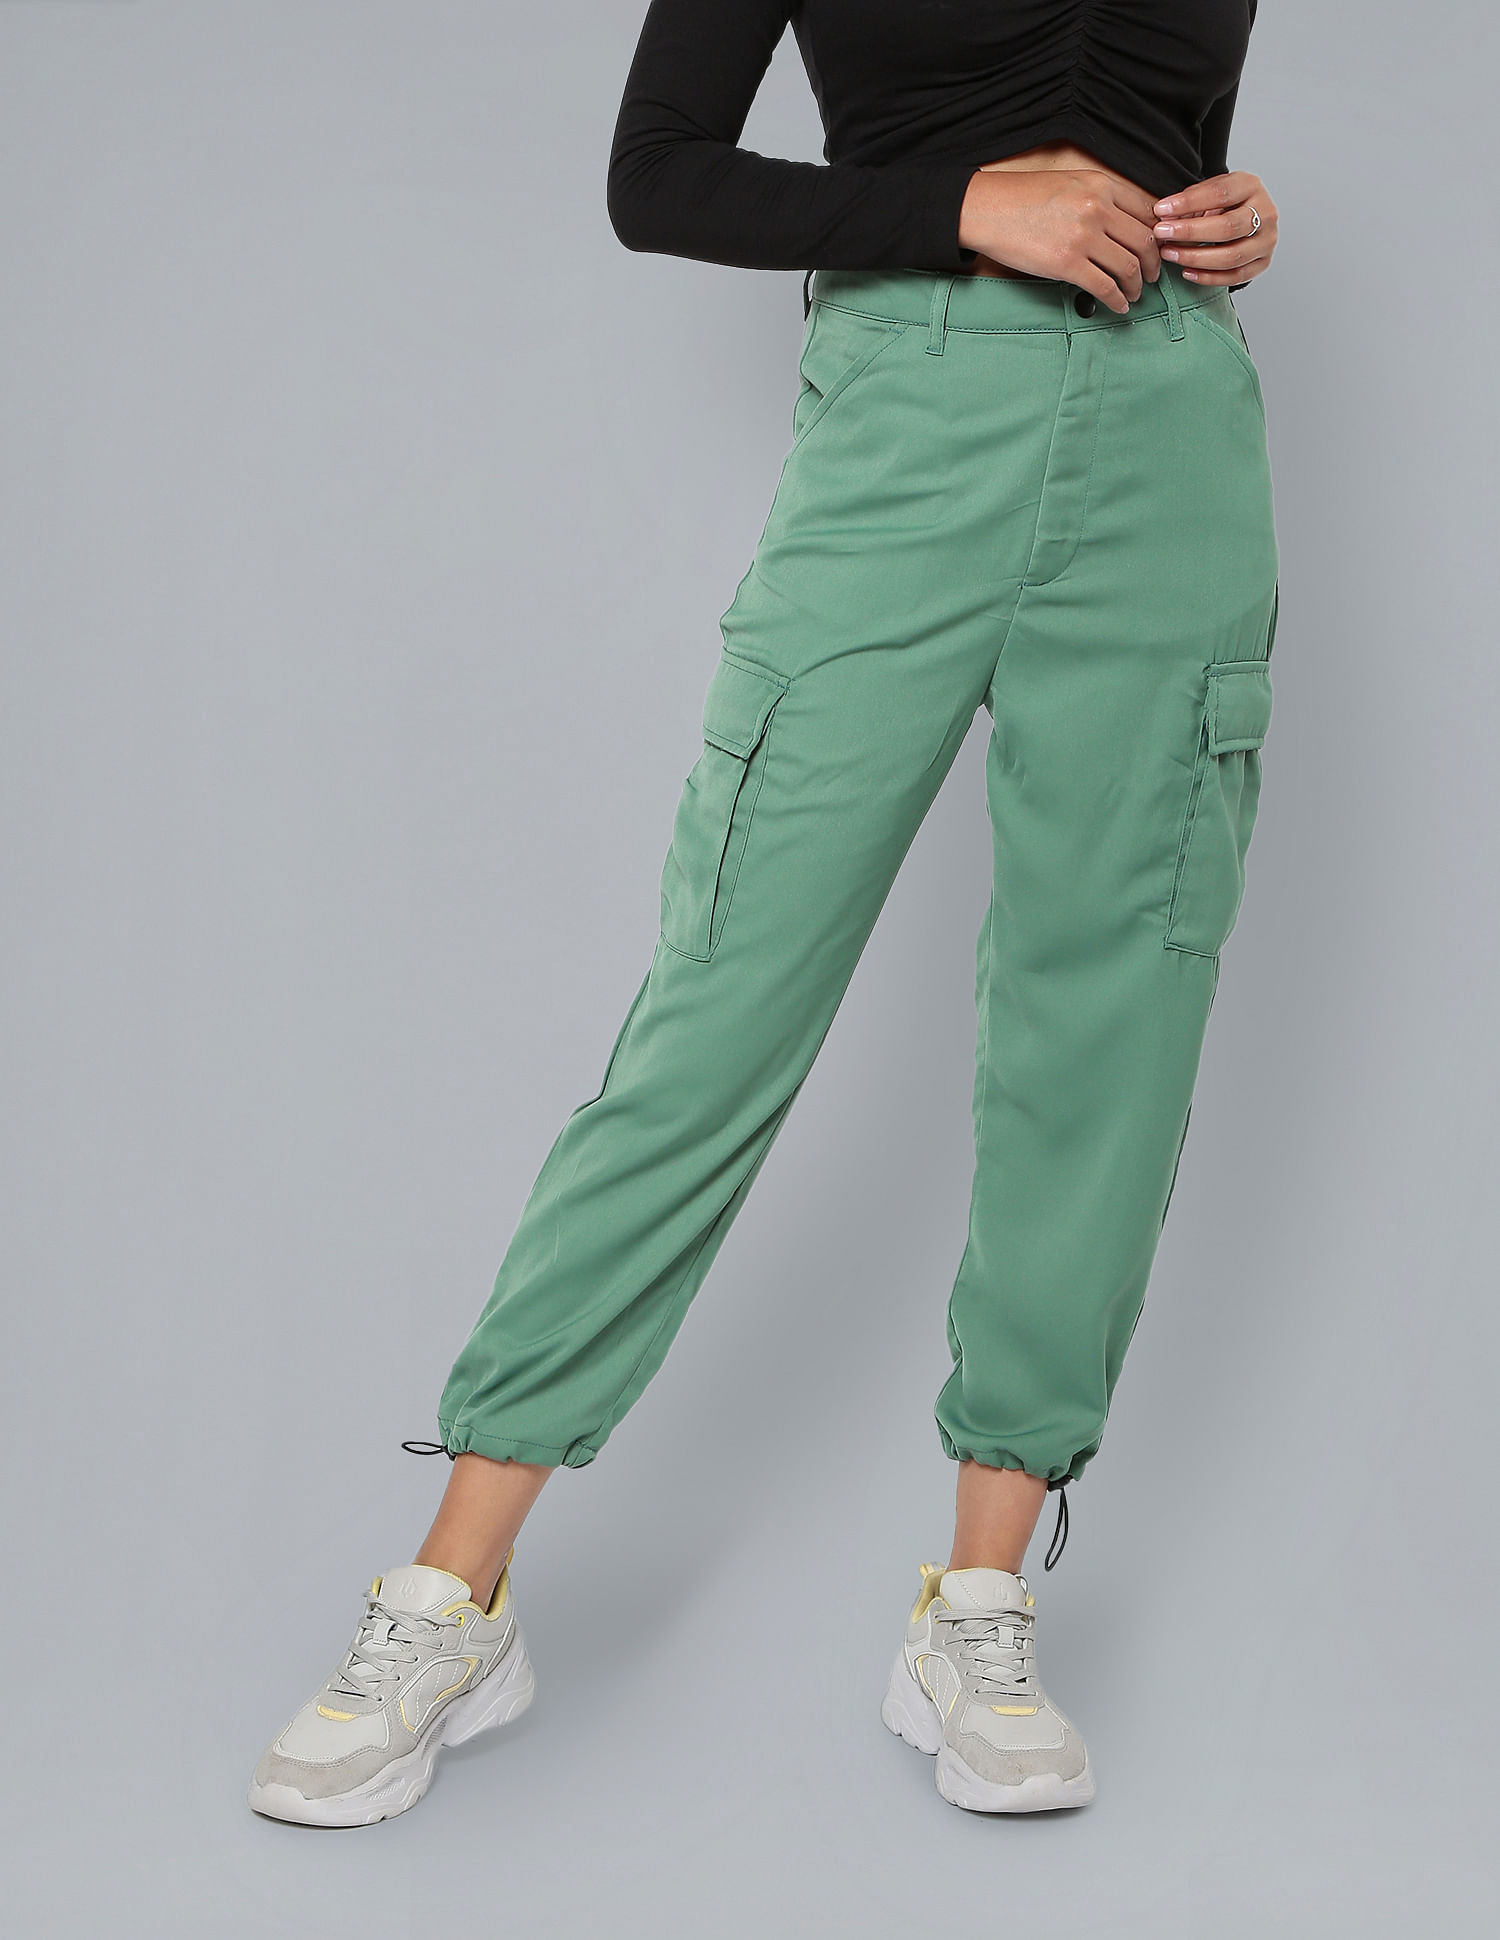 Buy WOMENS TROUSERS, WHITE Trousers, Cotton Summer Loose Pants Trousers,  Vacation Dress Casual Trousers for Women Clothing Online in India - Etsy